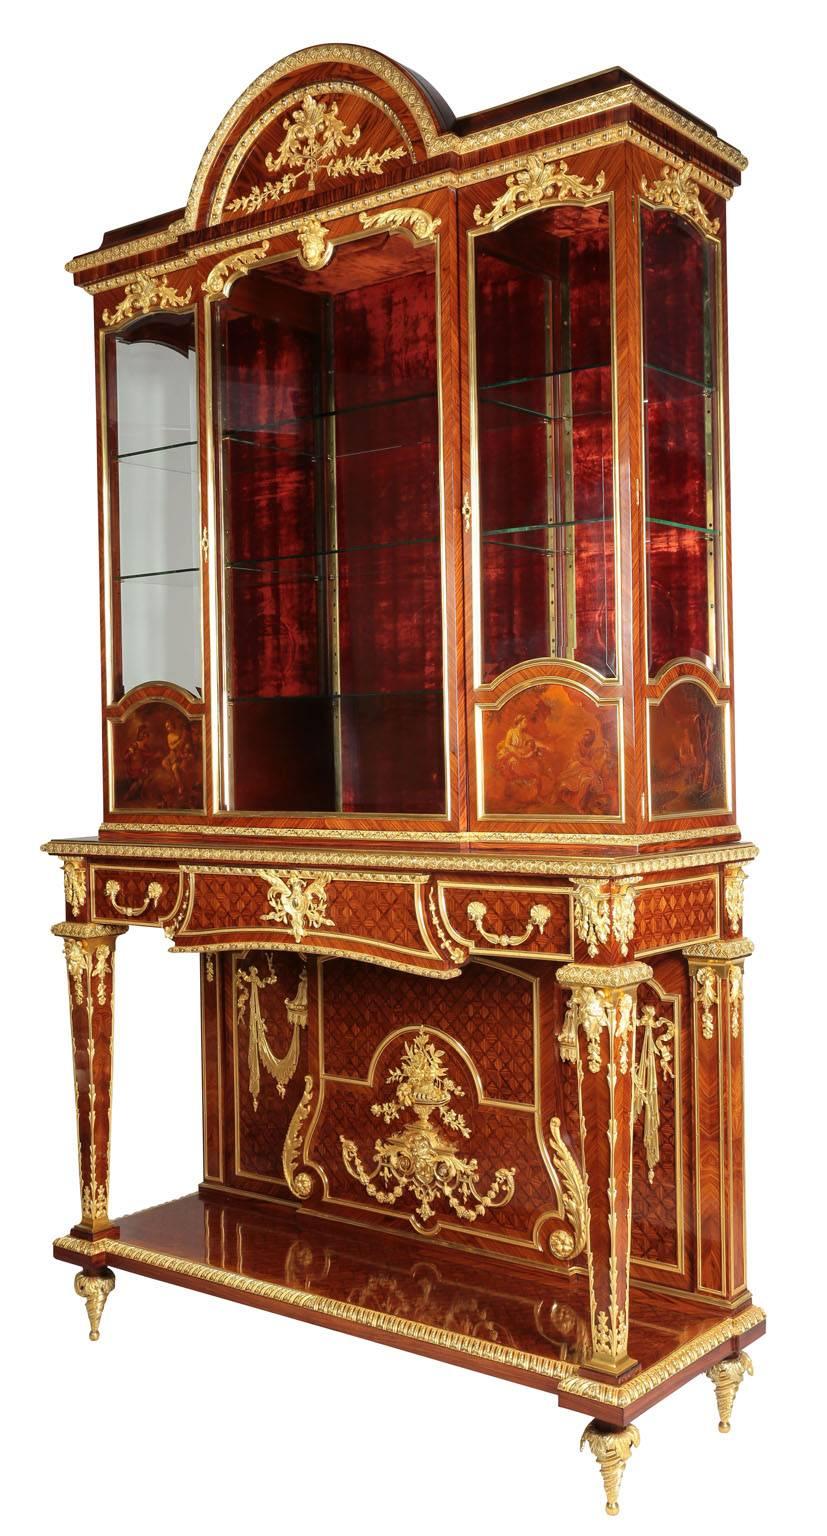 A superb quality palatial French Louis XVI style ormolu mounted, satinwood, kingwood parquetry and Vernis Martin style paneling three-door raised Vitrine Display Cabinet attributed to Paul Sormani (1817-1877). 

The Vernis Martin Panels signed 